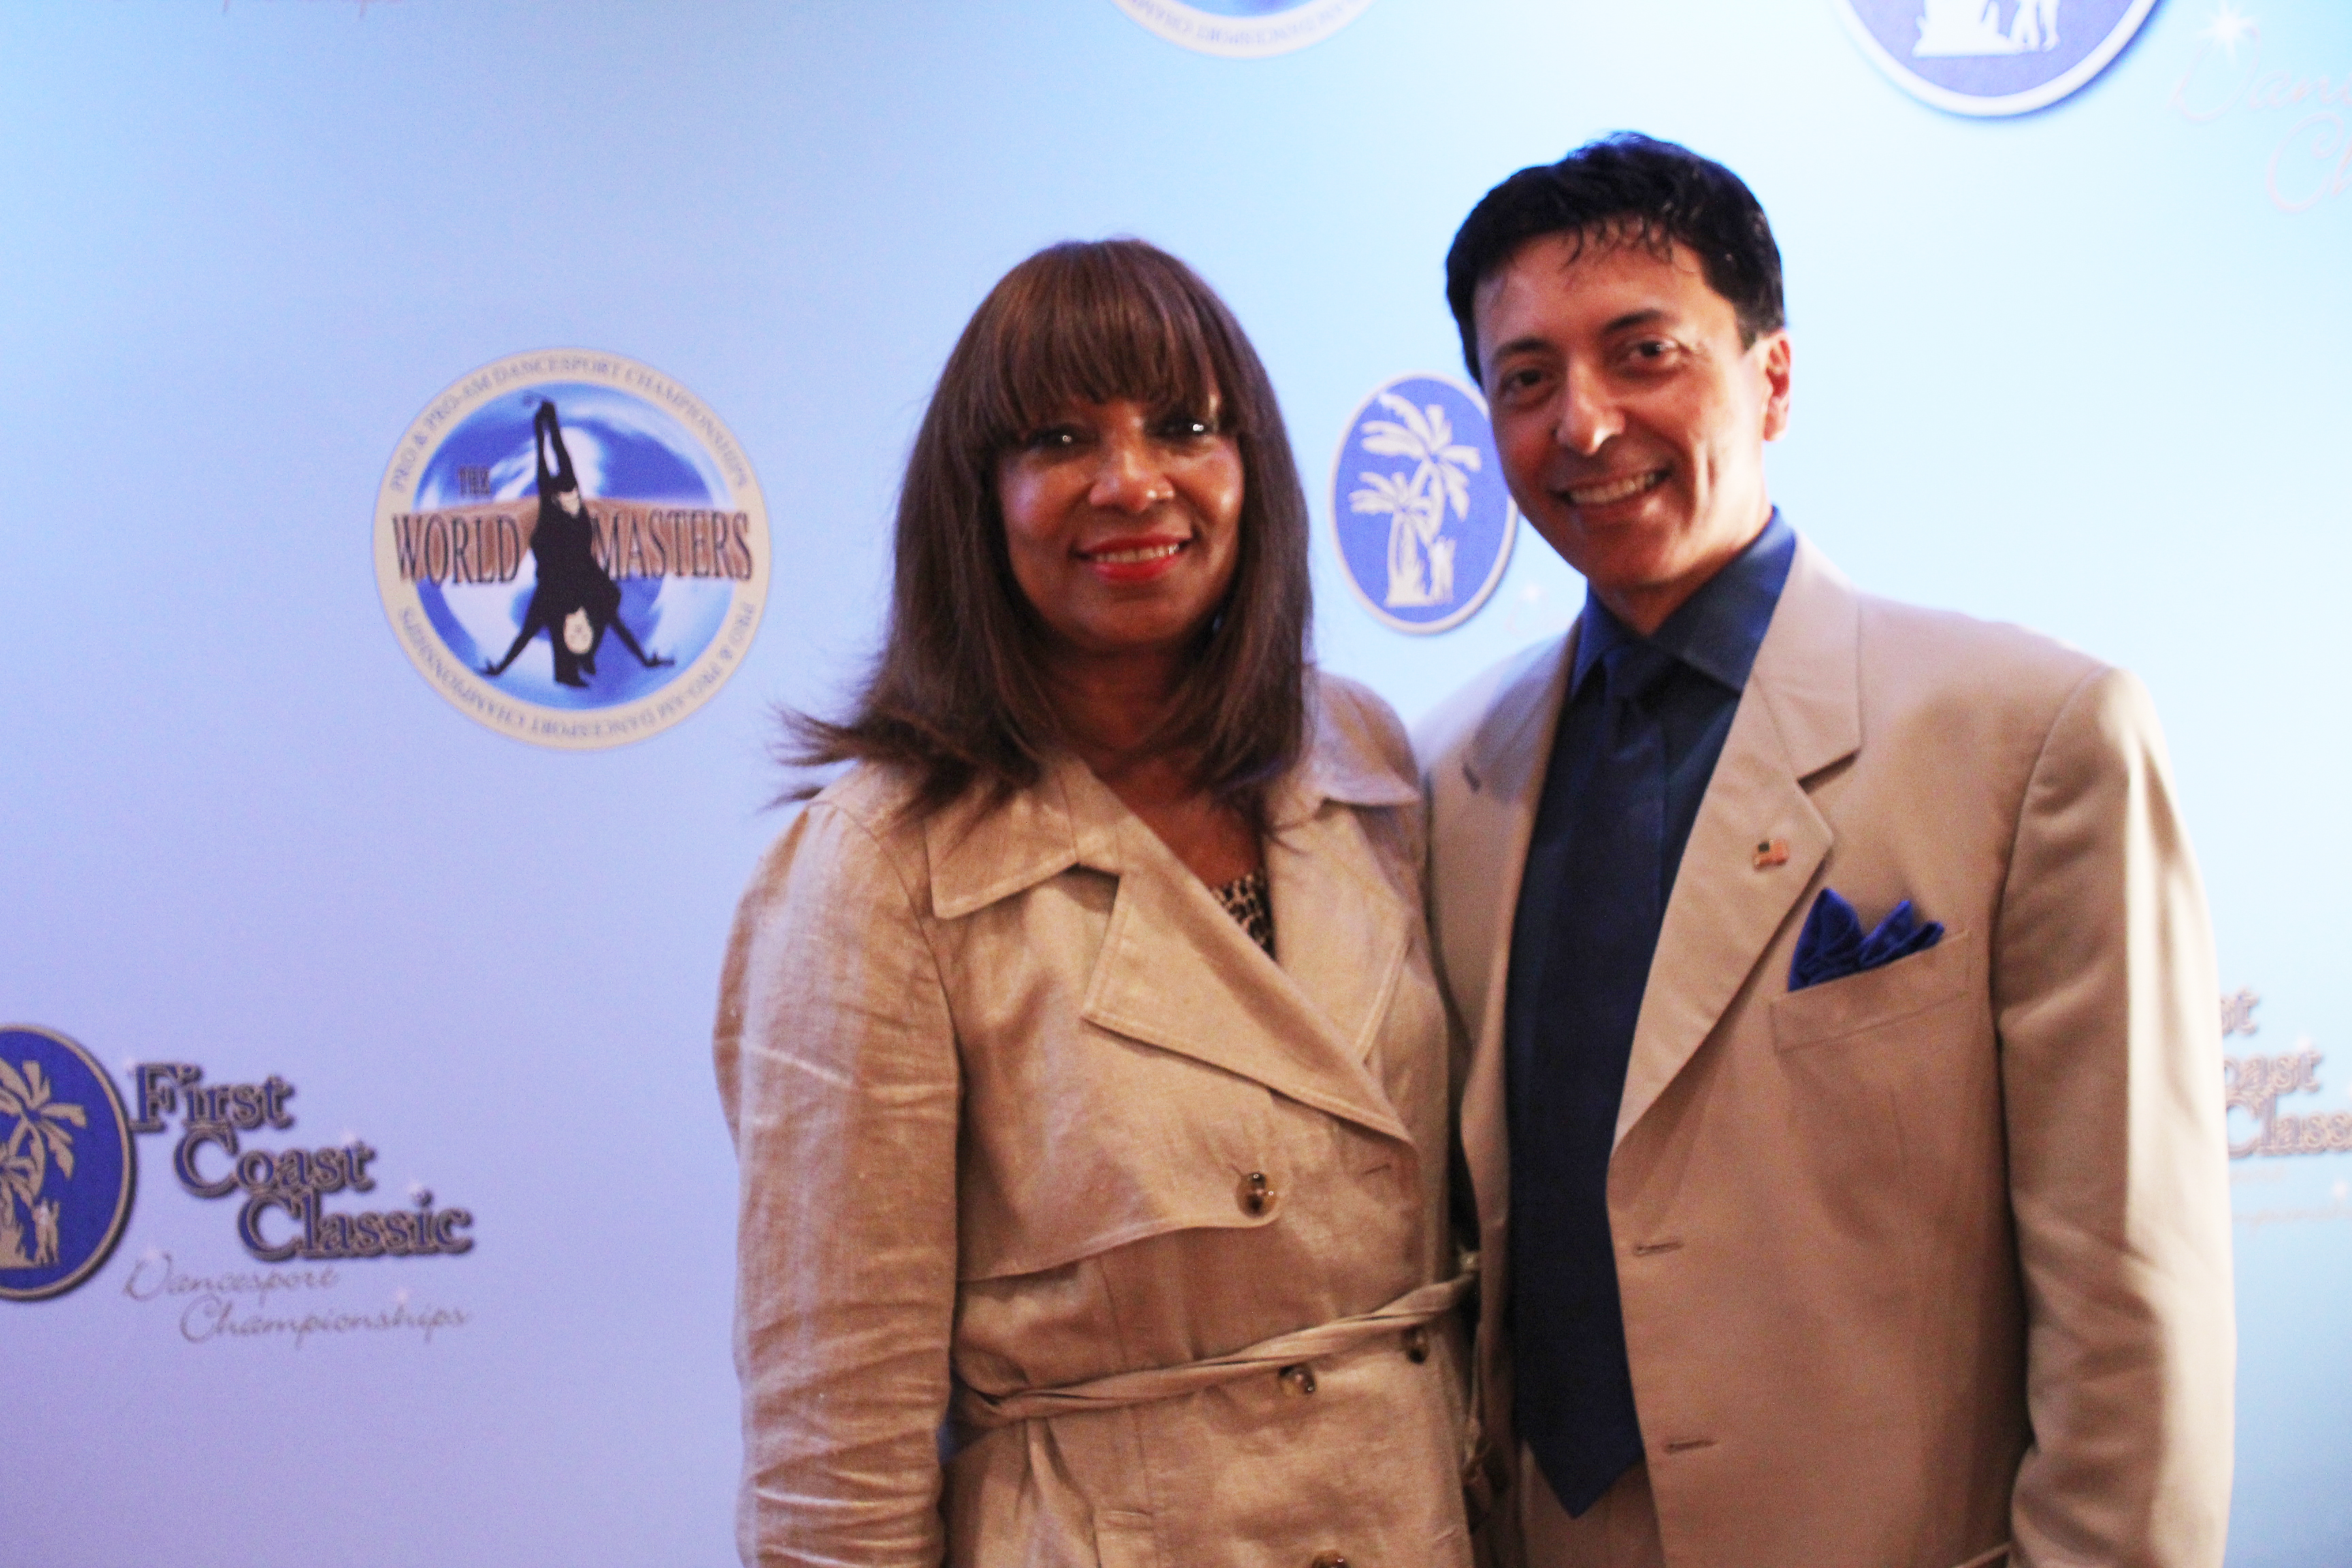 Beryle I. Baker with Sarwat Kaluby, host of First Coast Classic and Ohio Star Ball; Photo by Gift Star Productions